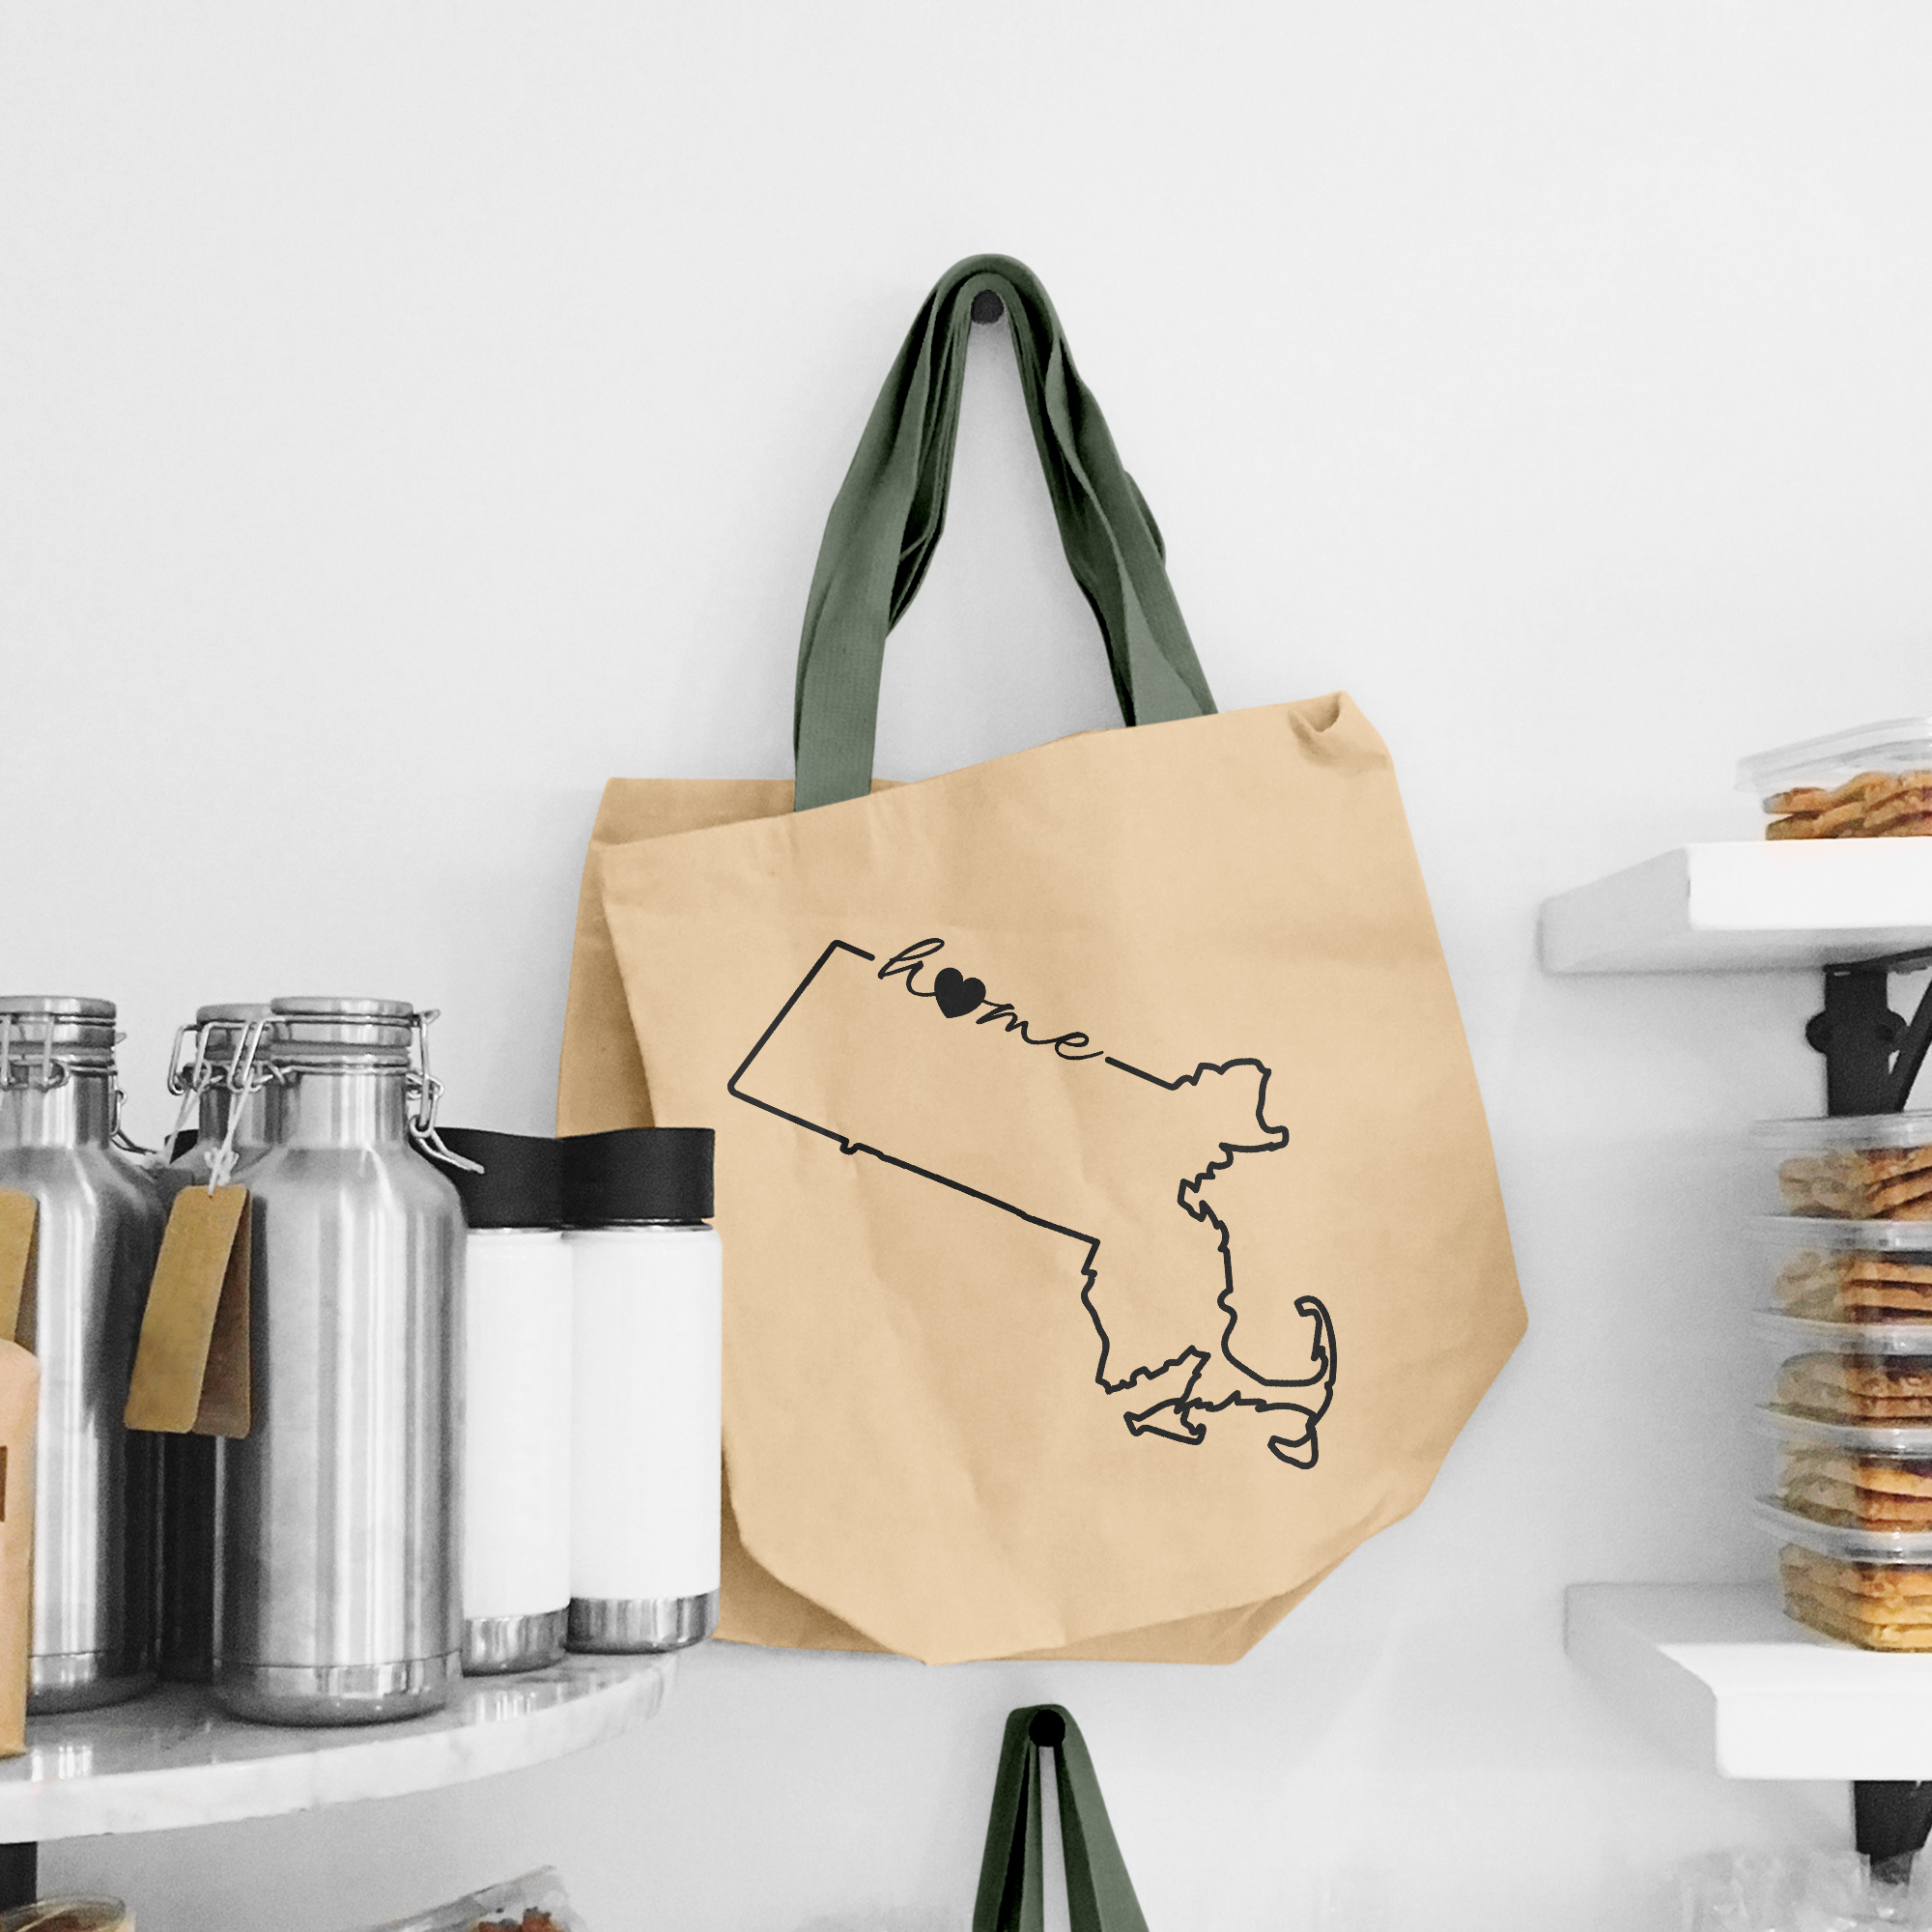 Black illustration of map of Massachusetts on the beige shopping bag with dirty green handle.